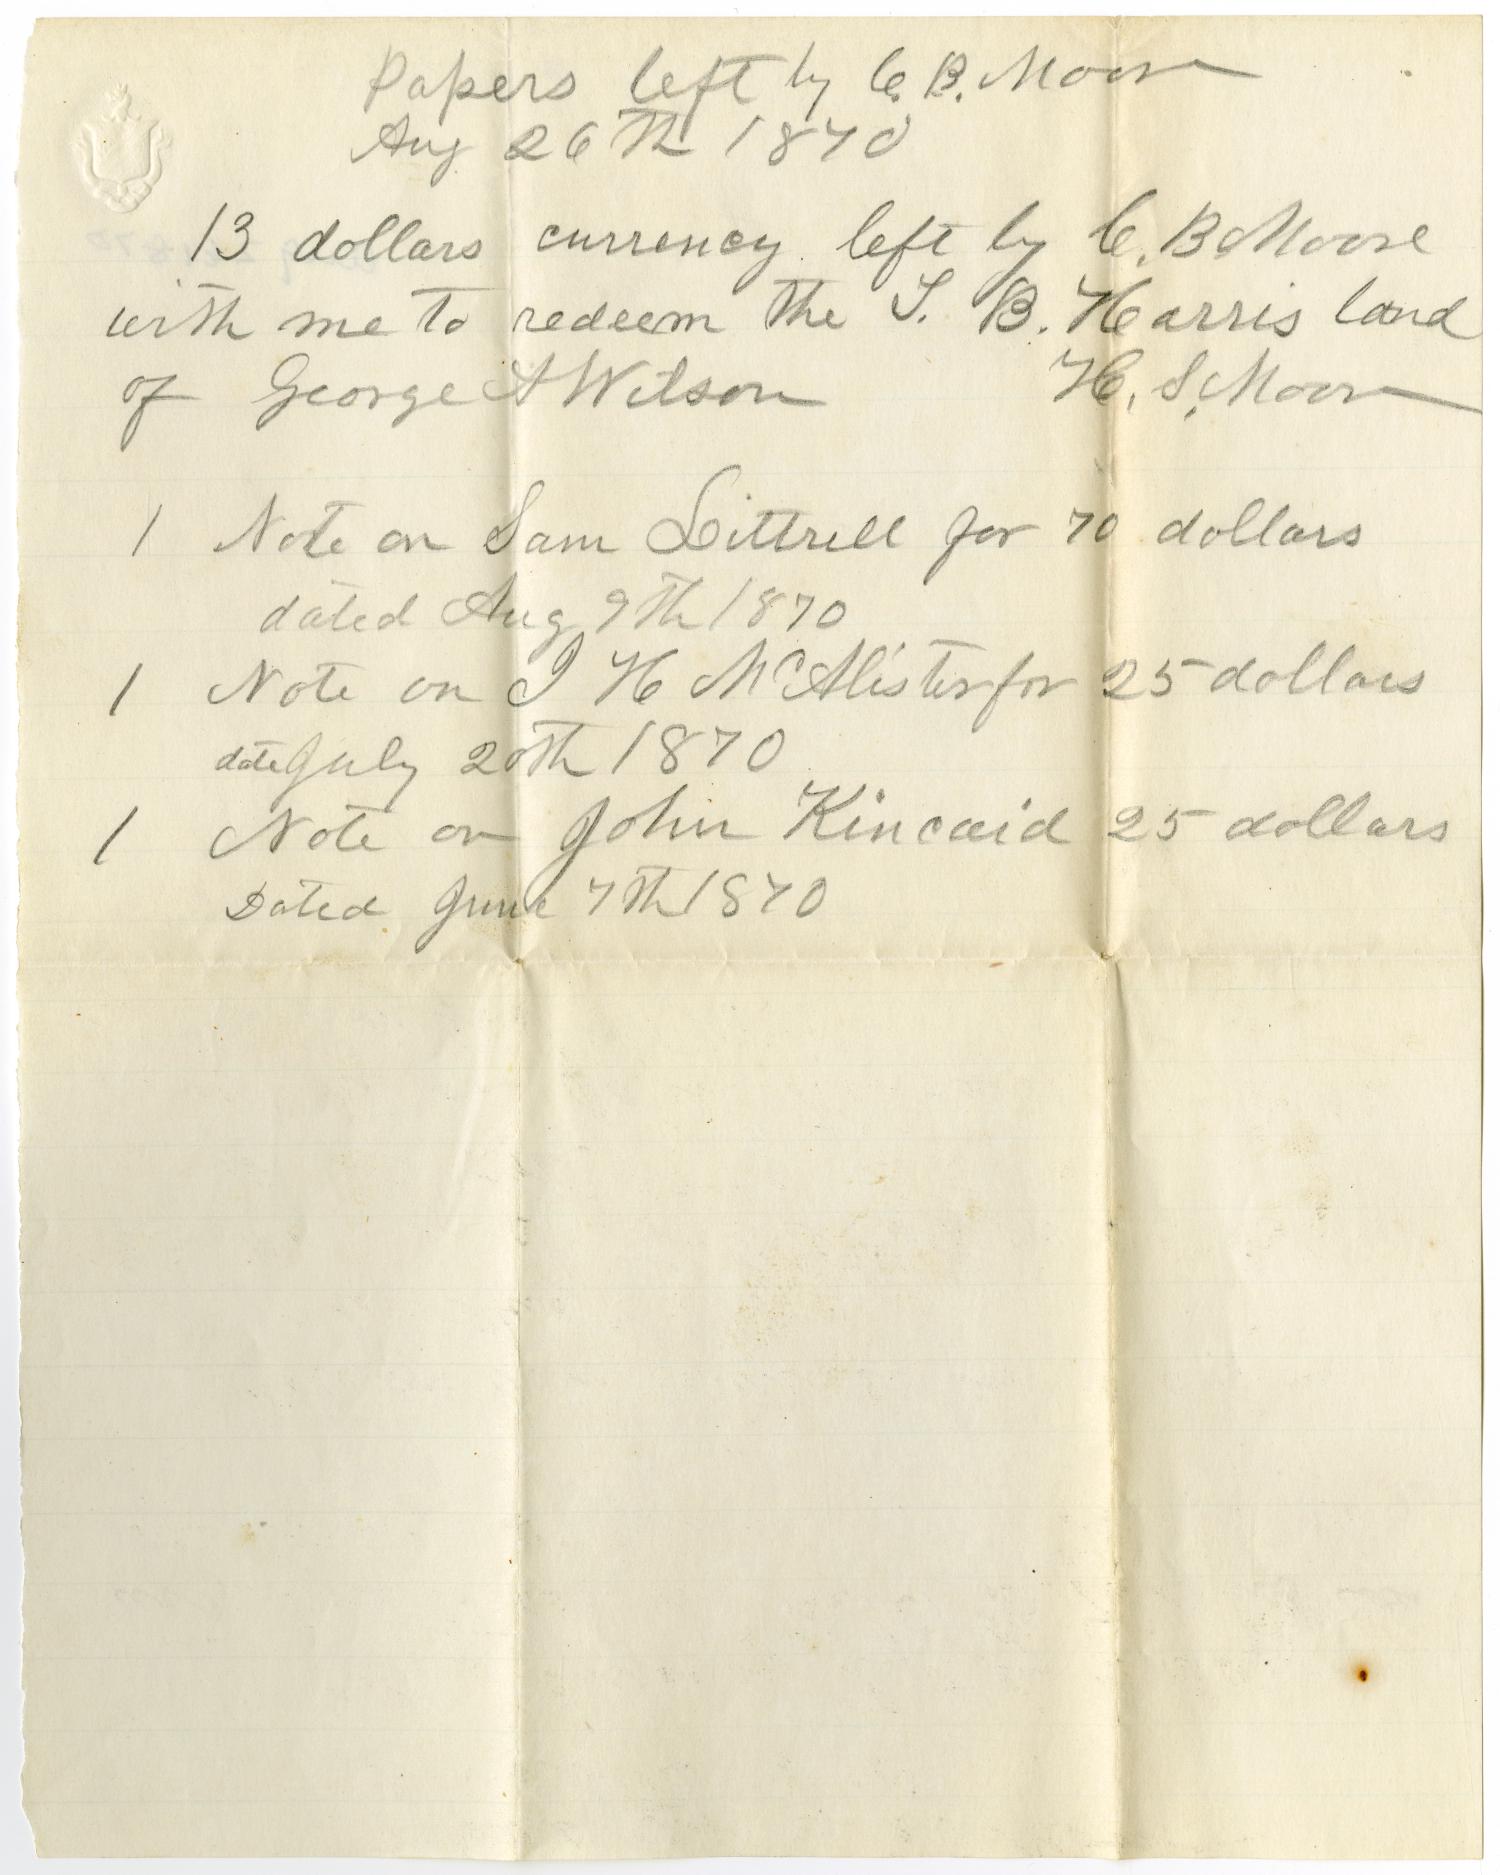 [List of papers left by C. B. Moore, August 26, 1870]
                                                
                                                    [Sequence #]: 1 of 2
                                                